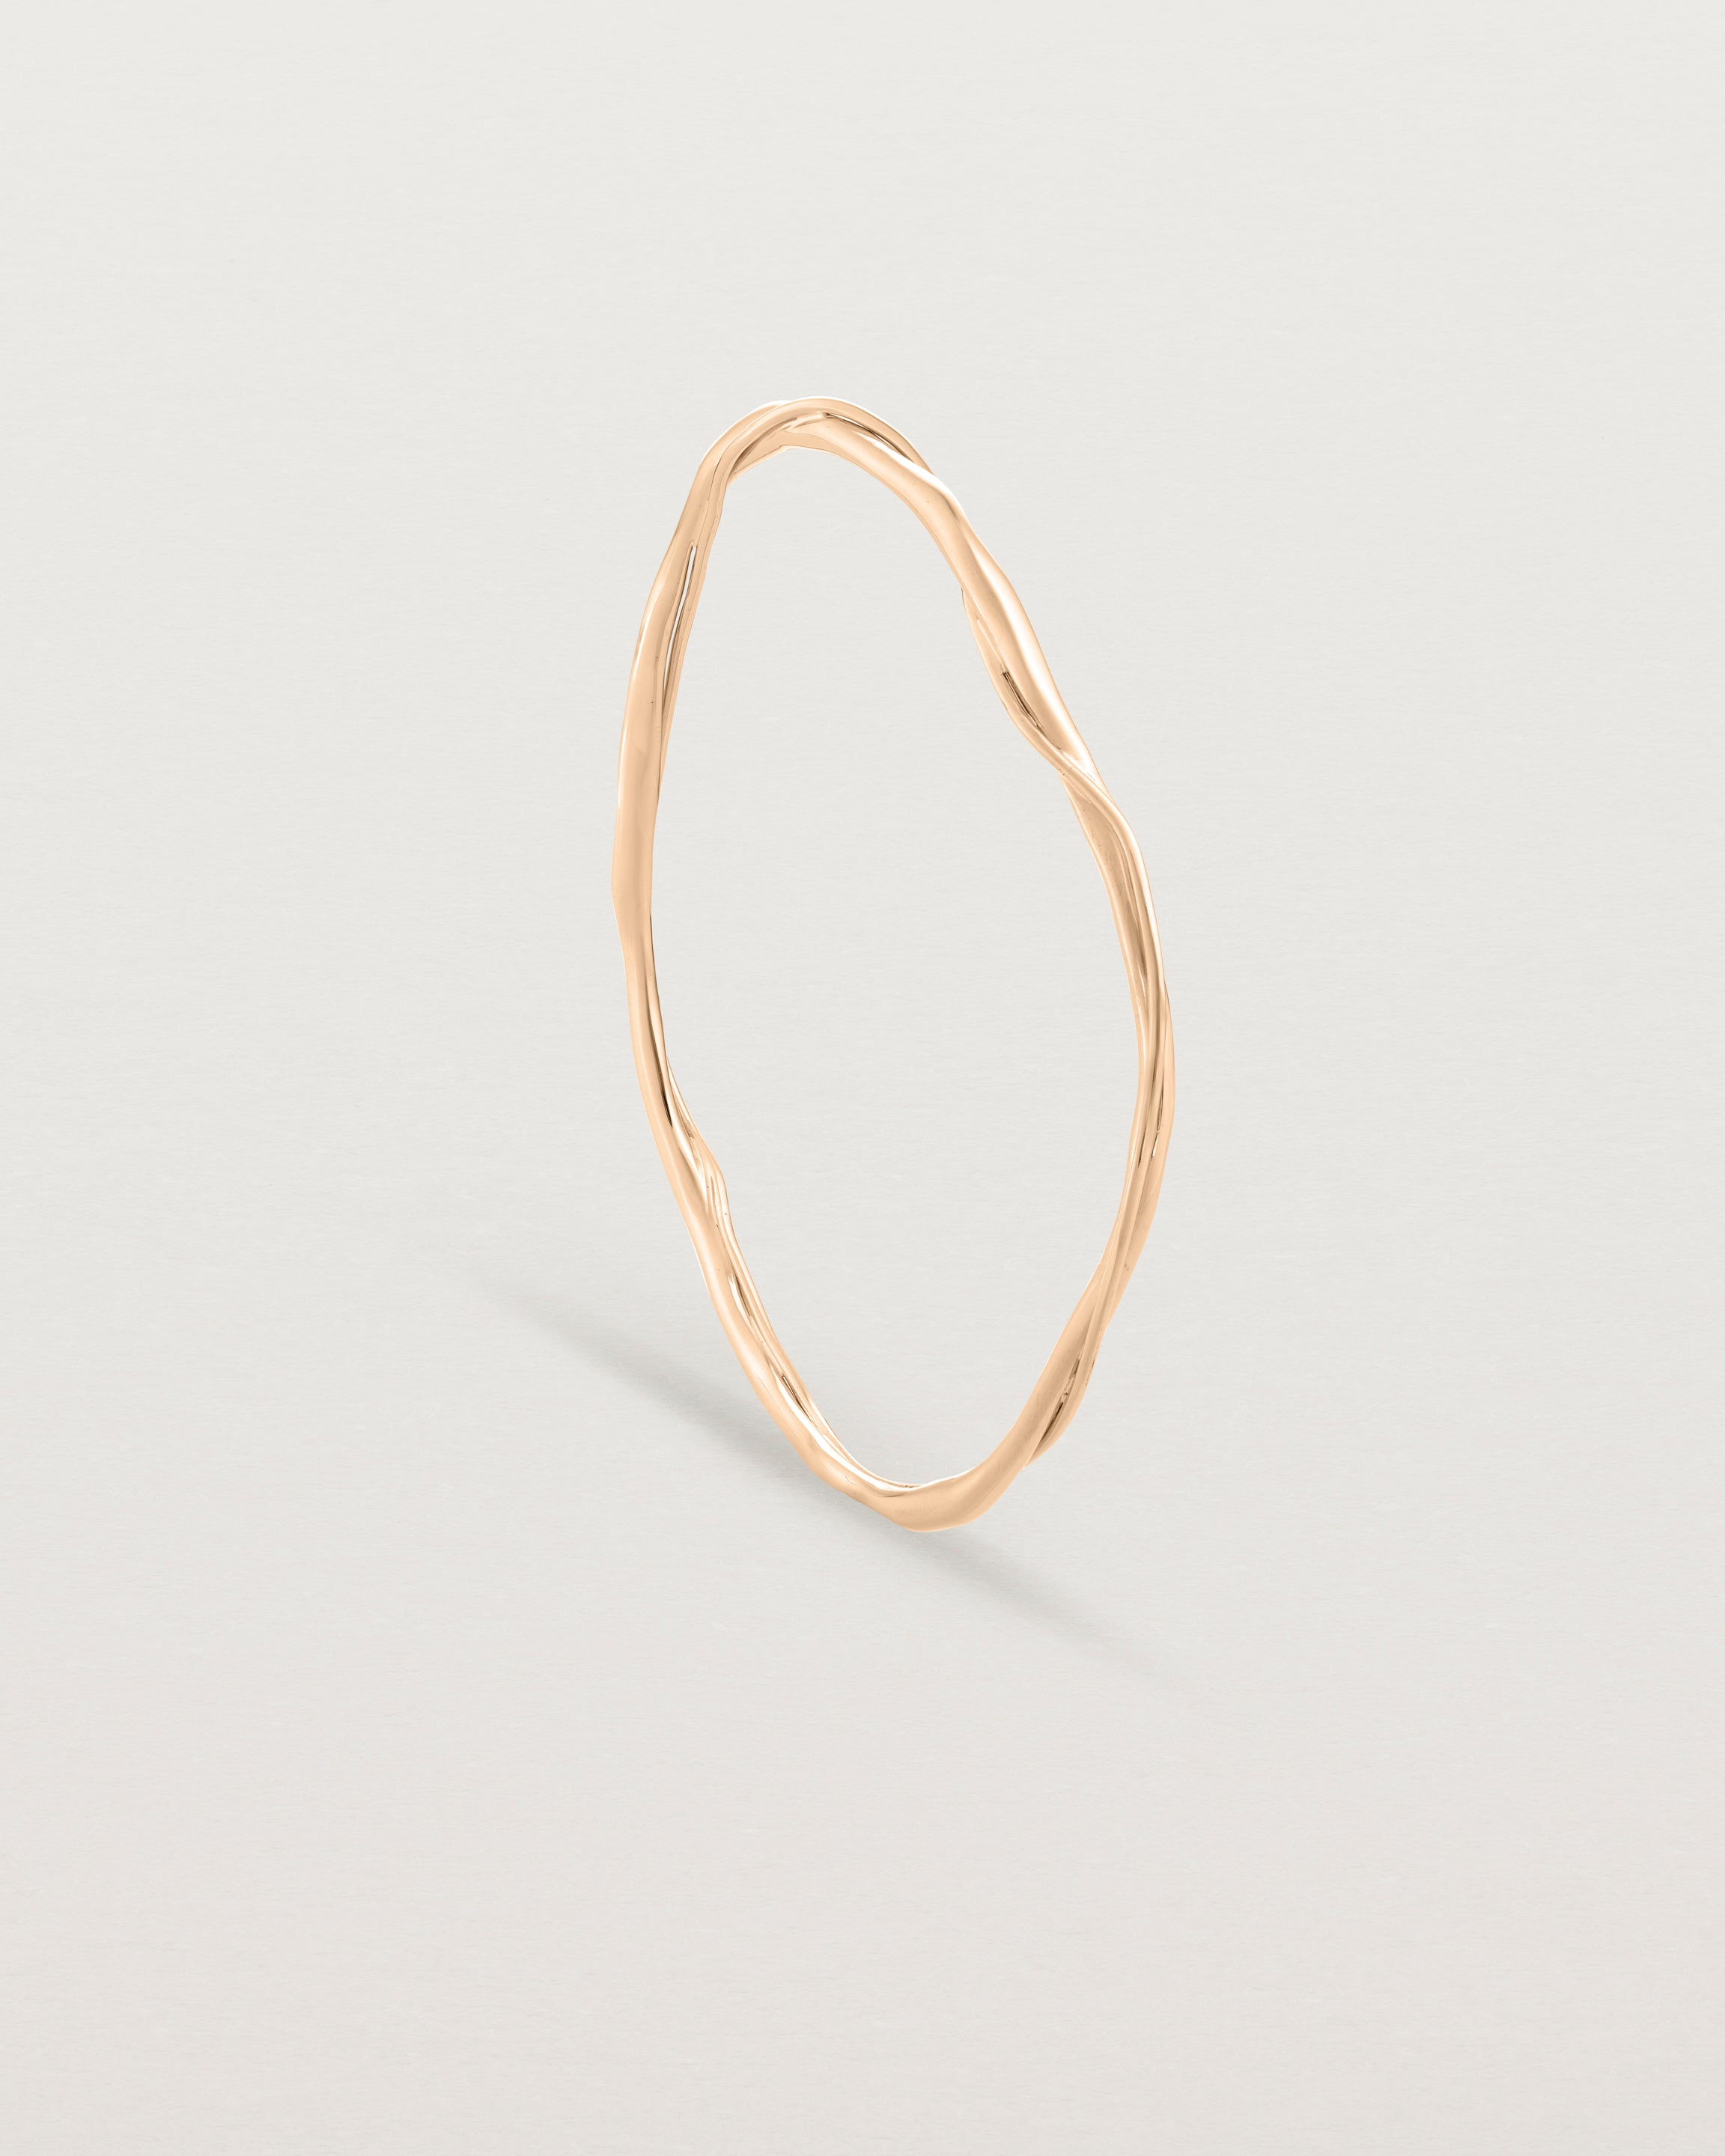 Standing view of the Dalí Bangle in rose gold